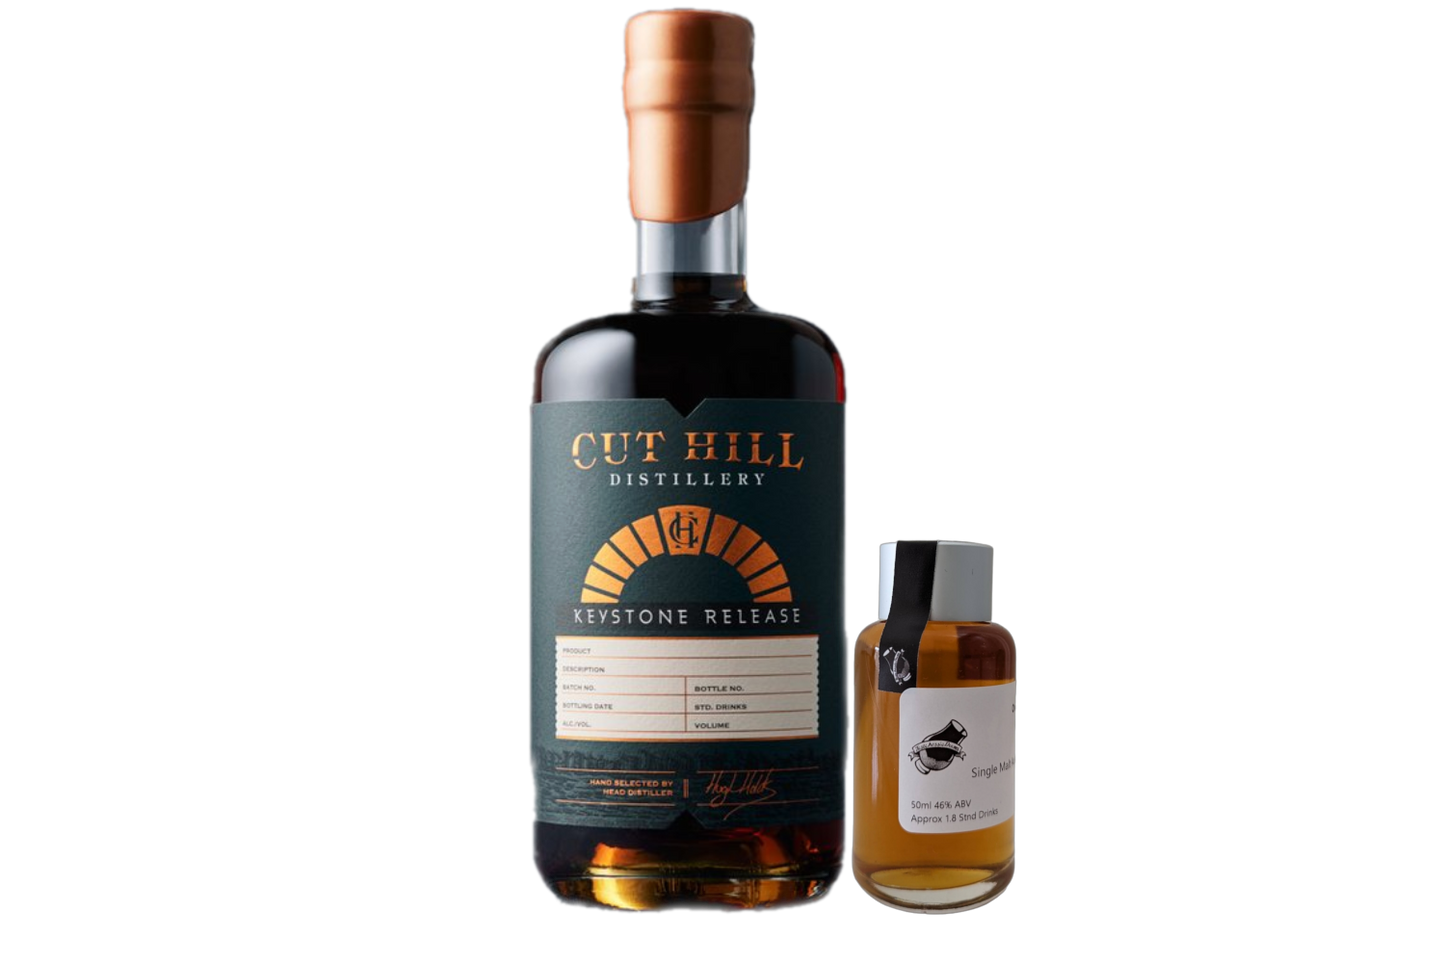 Cut Hill Distillery 'Keystone Release Stonecutter Selection #1 Shiraz Single Cask' Various Size Samples